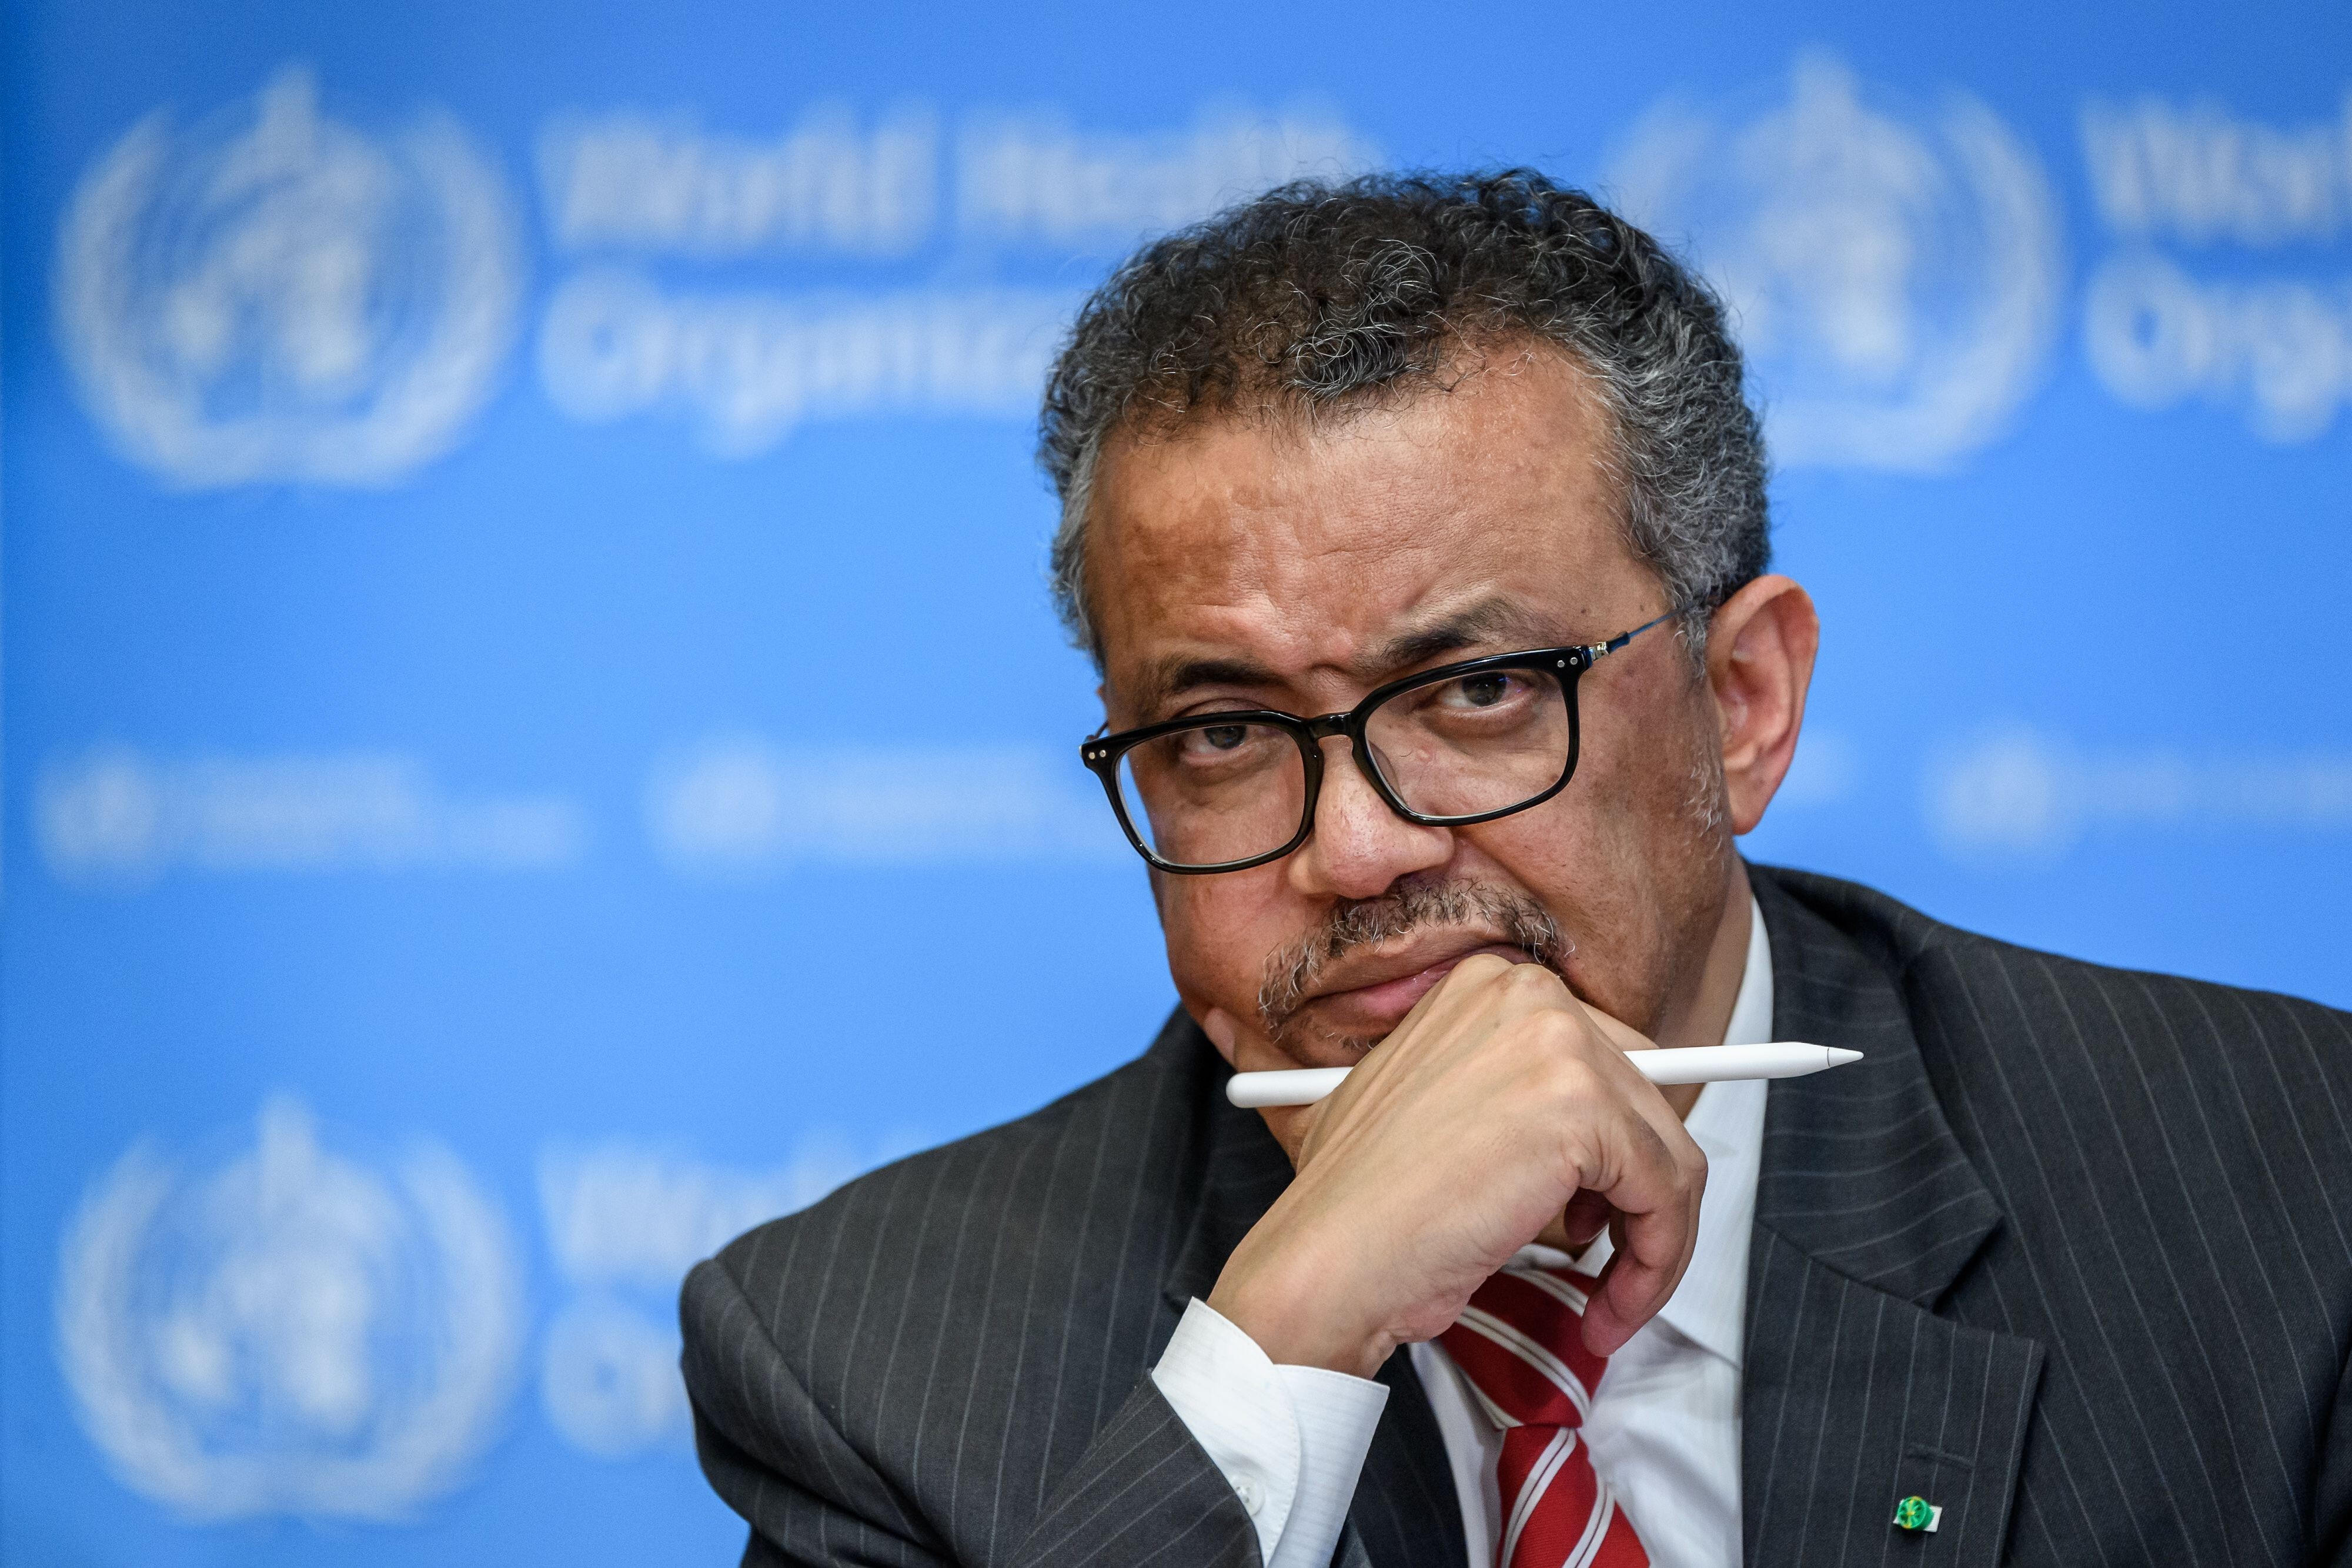 World Health Organisation director general Tedros Adhanom Ghebreyesus at a Covid-19 press briefing at WHO’s headquarters in Geneva. Tedros has been criticised for praising China’s handling of the outbreak. Photo: Reuters